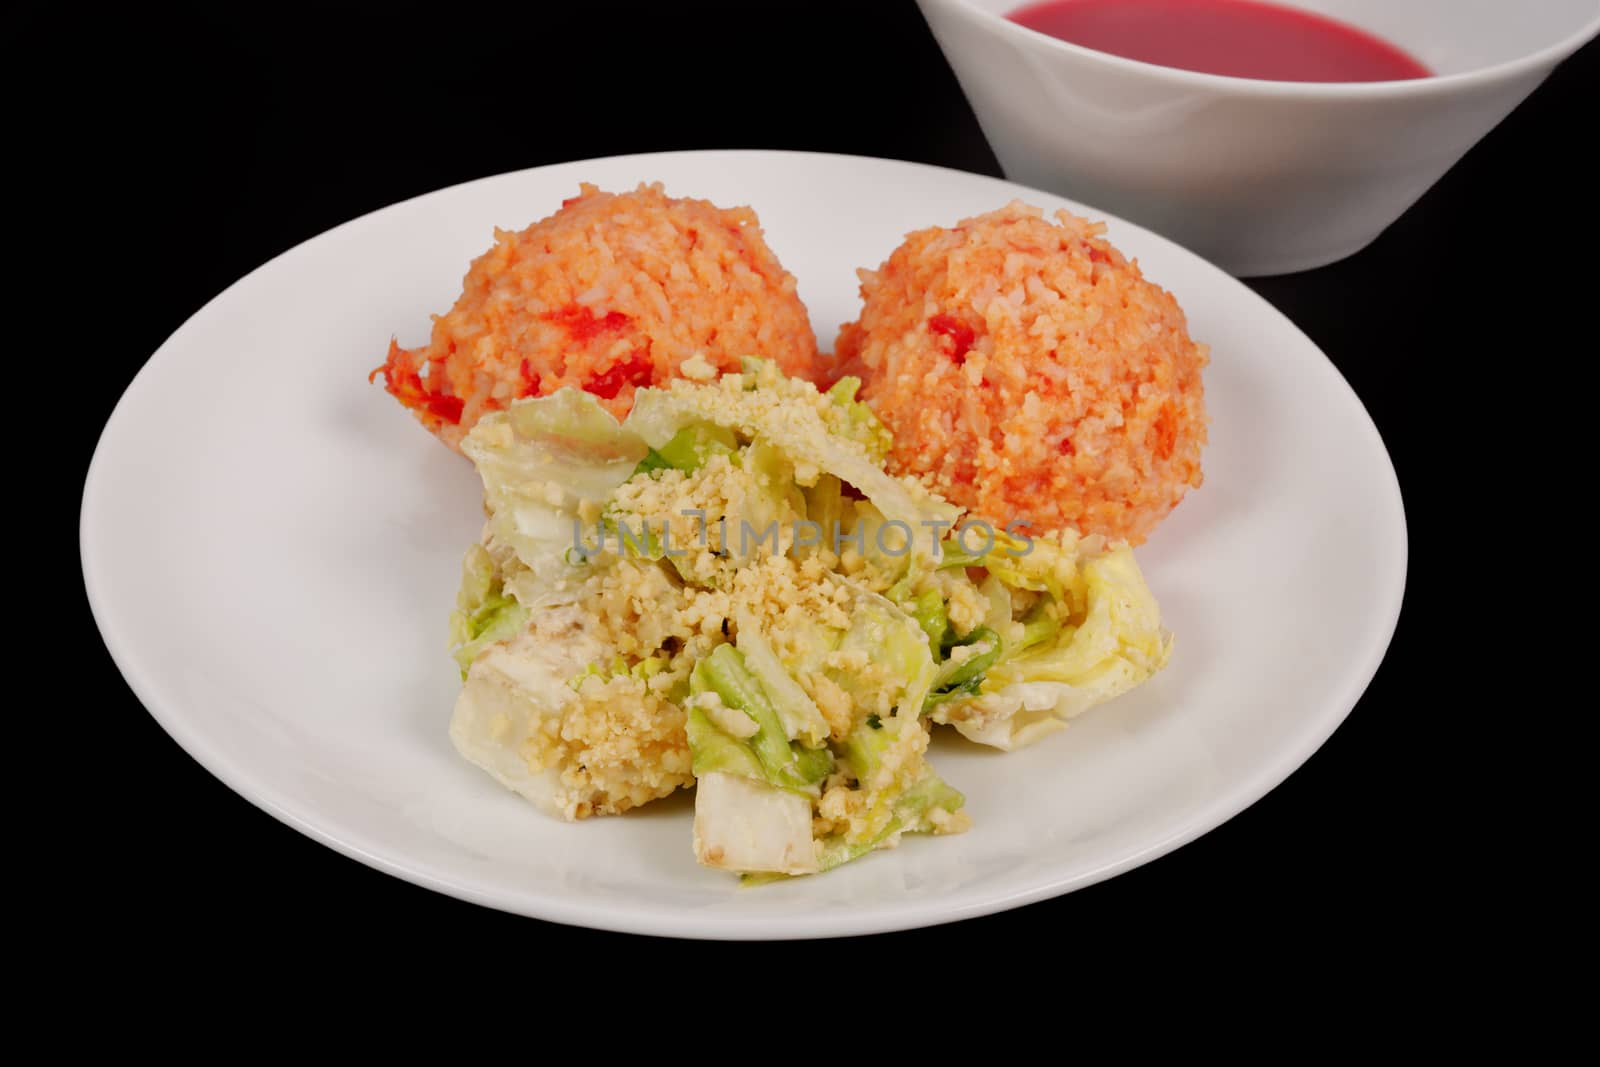 Tomato rice and salad on a black background